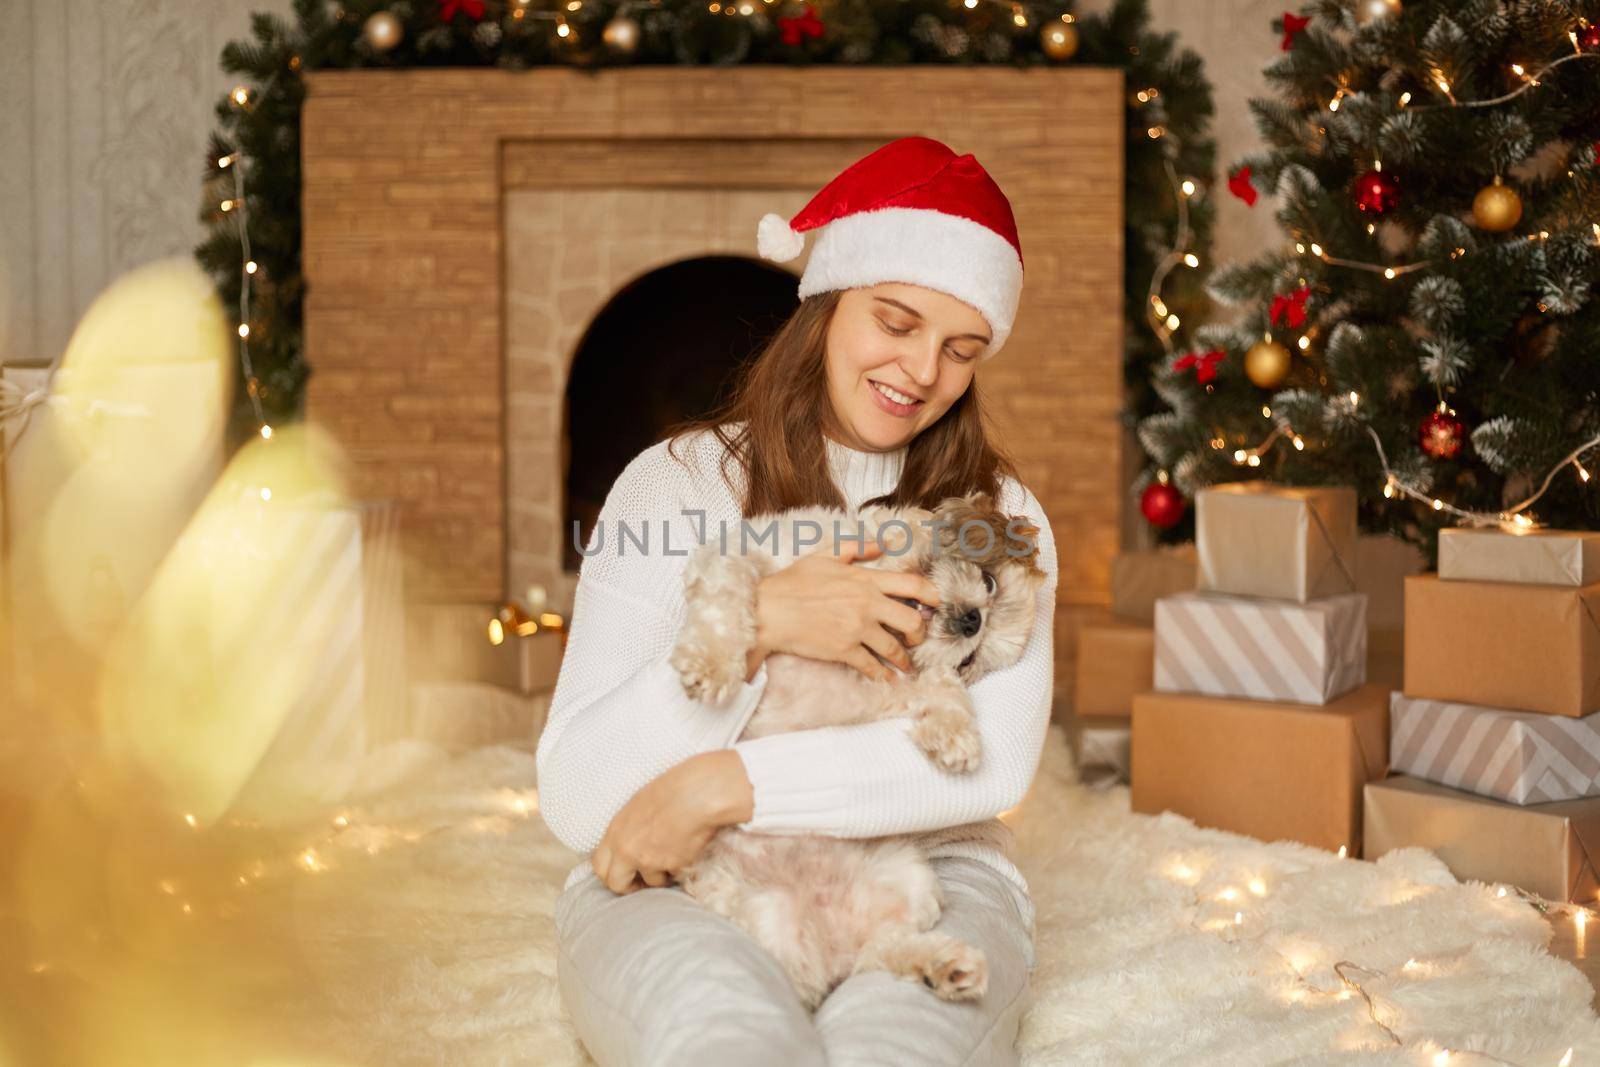 Girl with Pekingese dog on background of Christmas decorations and fireplace, woman with puppy sitting on floor on soft carpet, female wearing white casual jumper and red hat.